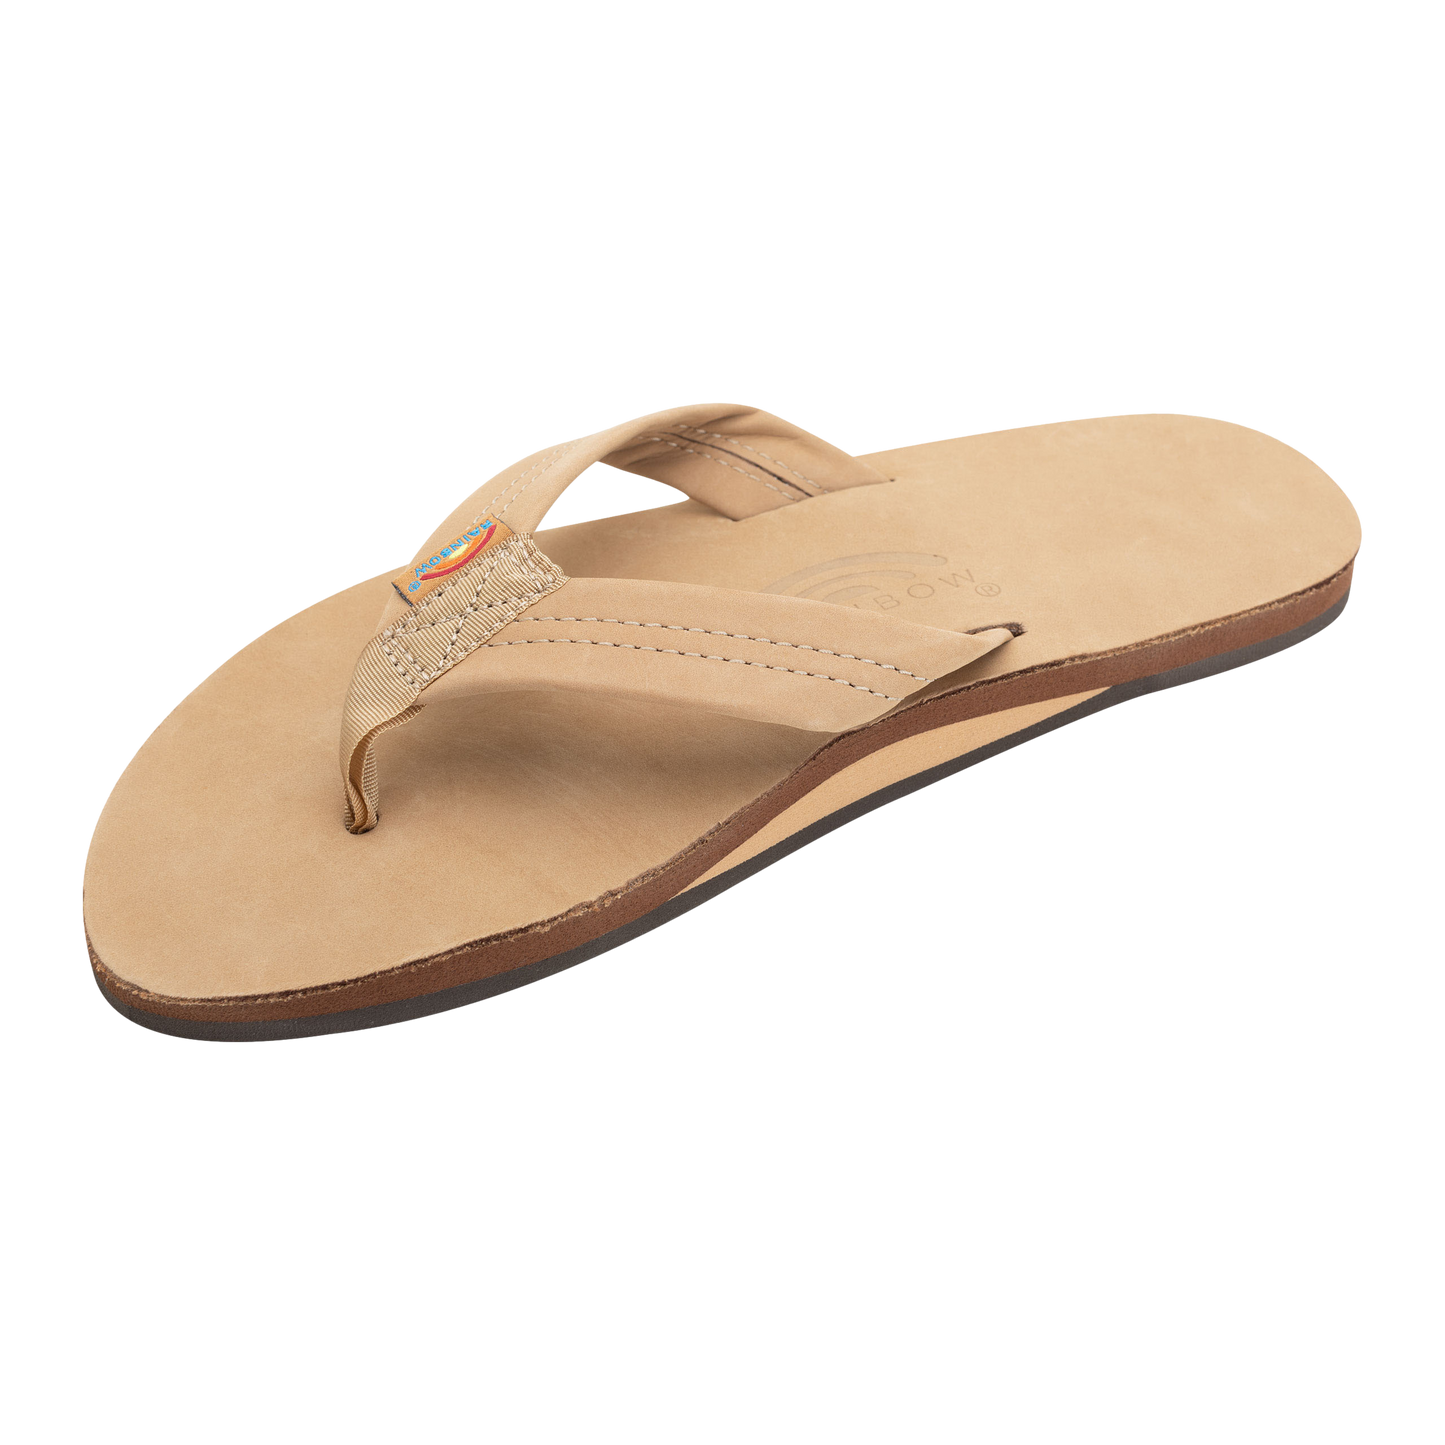 Rainbow Single Layer Premier Leather with Arch Support 1" Strap Sierra Brown Sandal